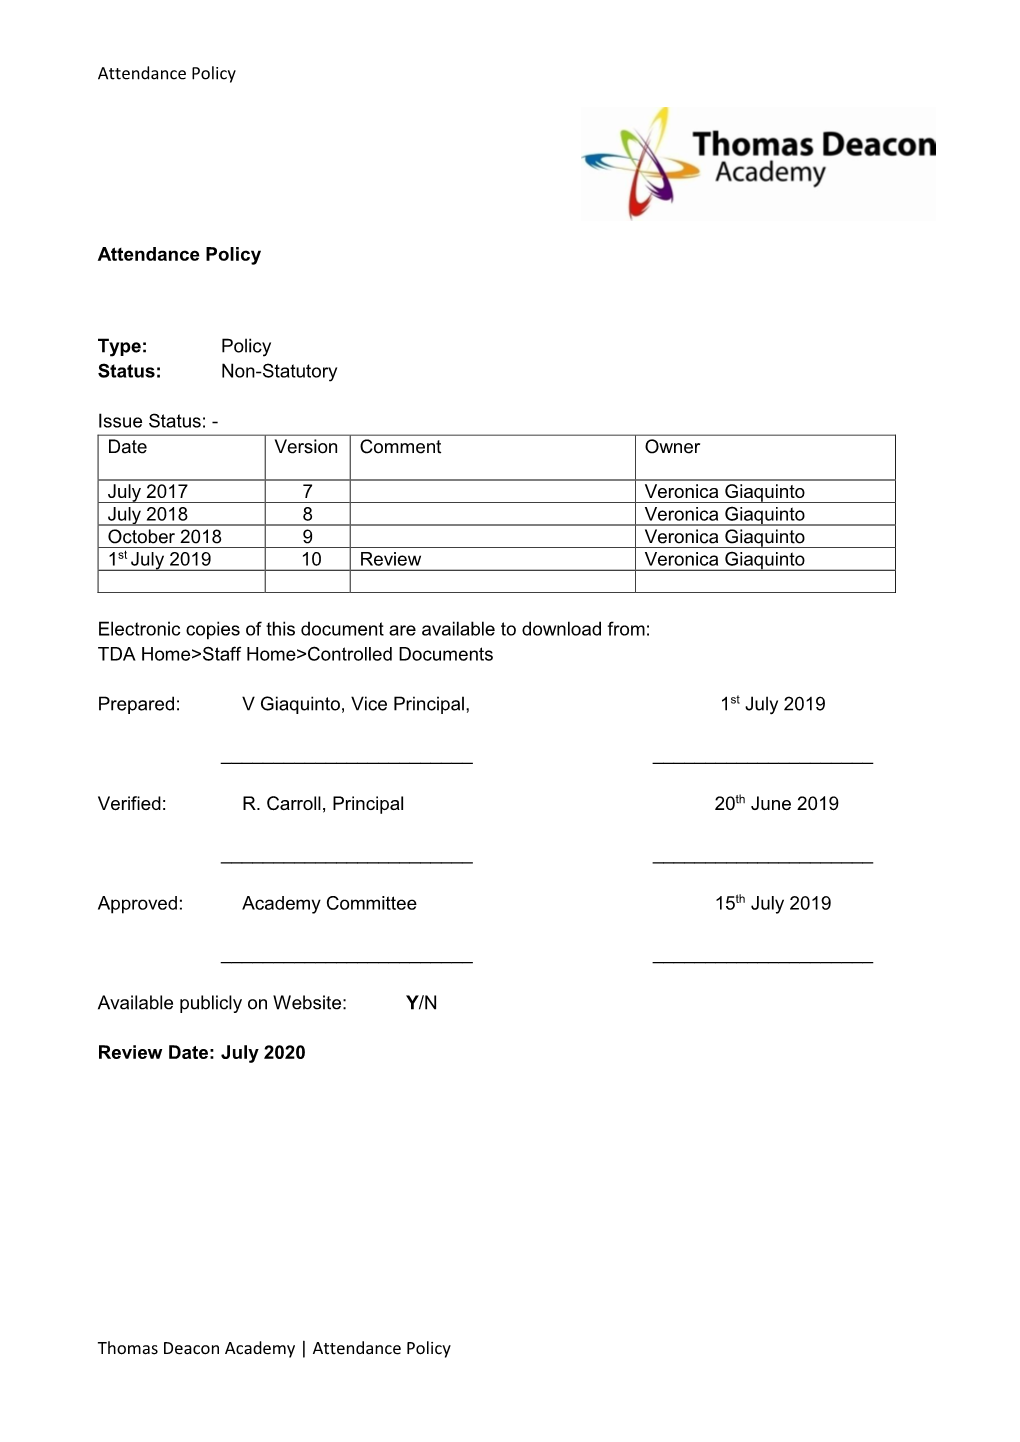 Attendance Policy Thomas Deacon Academy | Attendance Policy